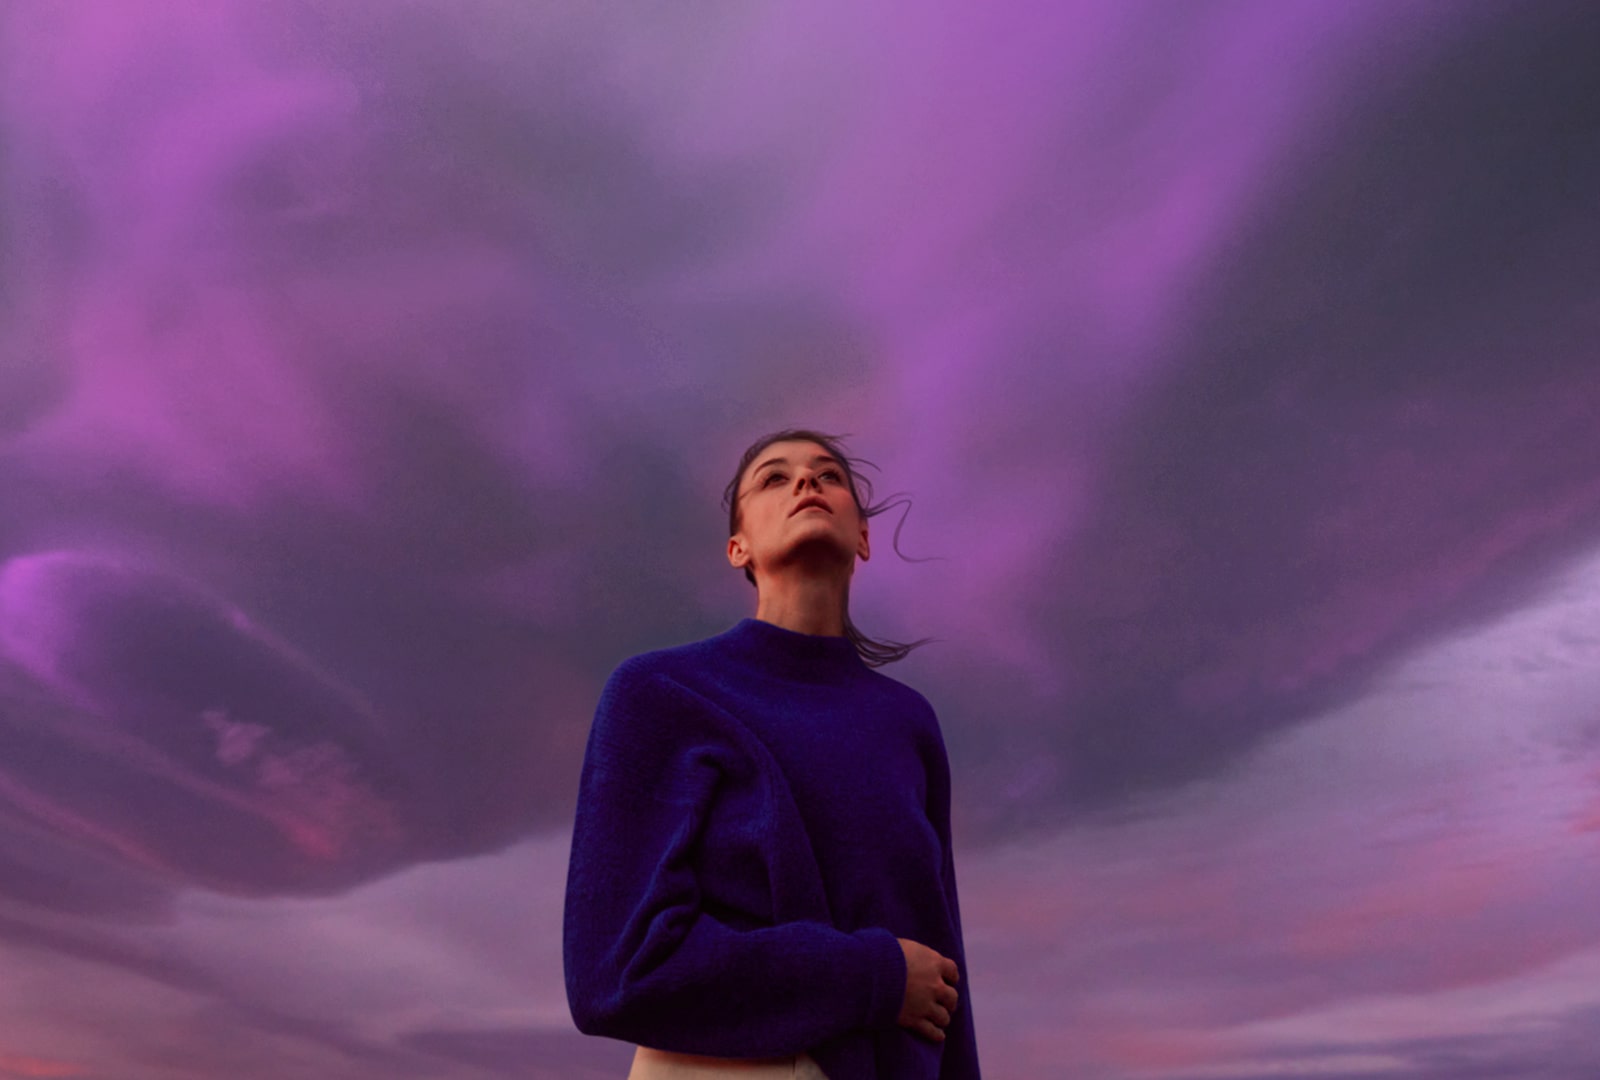 A woman looks at the purple sky. Her hair is slightly disheveled.